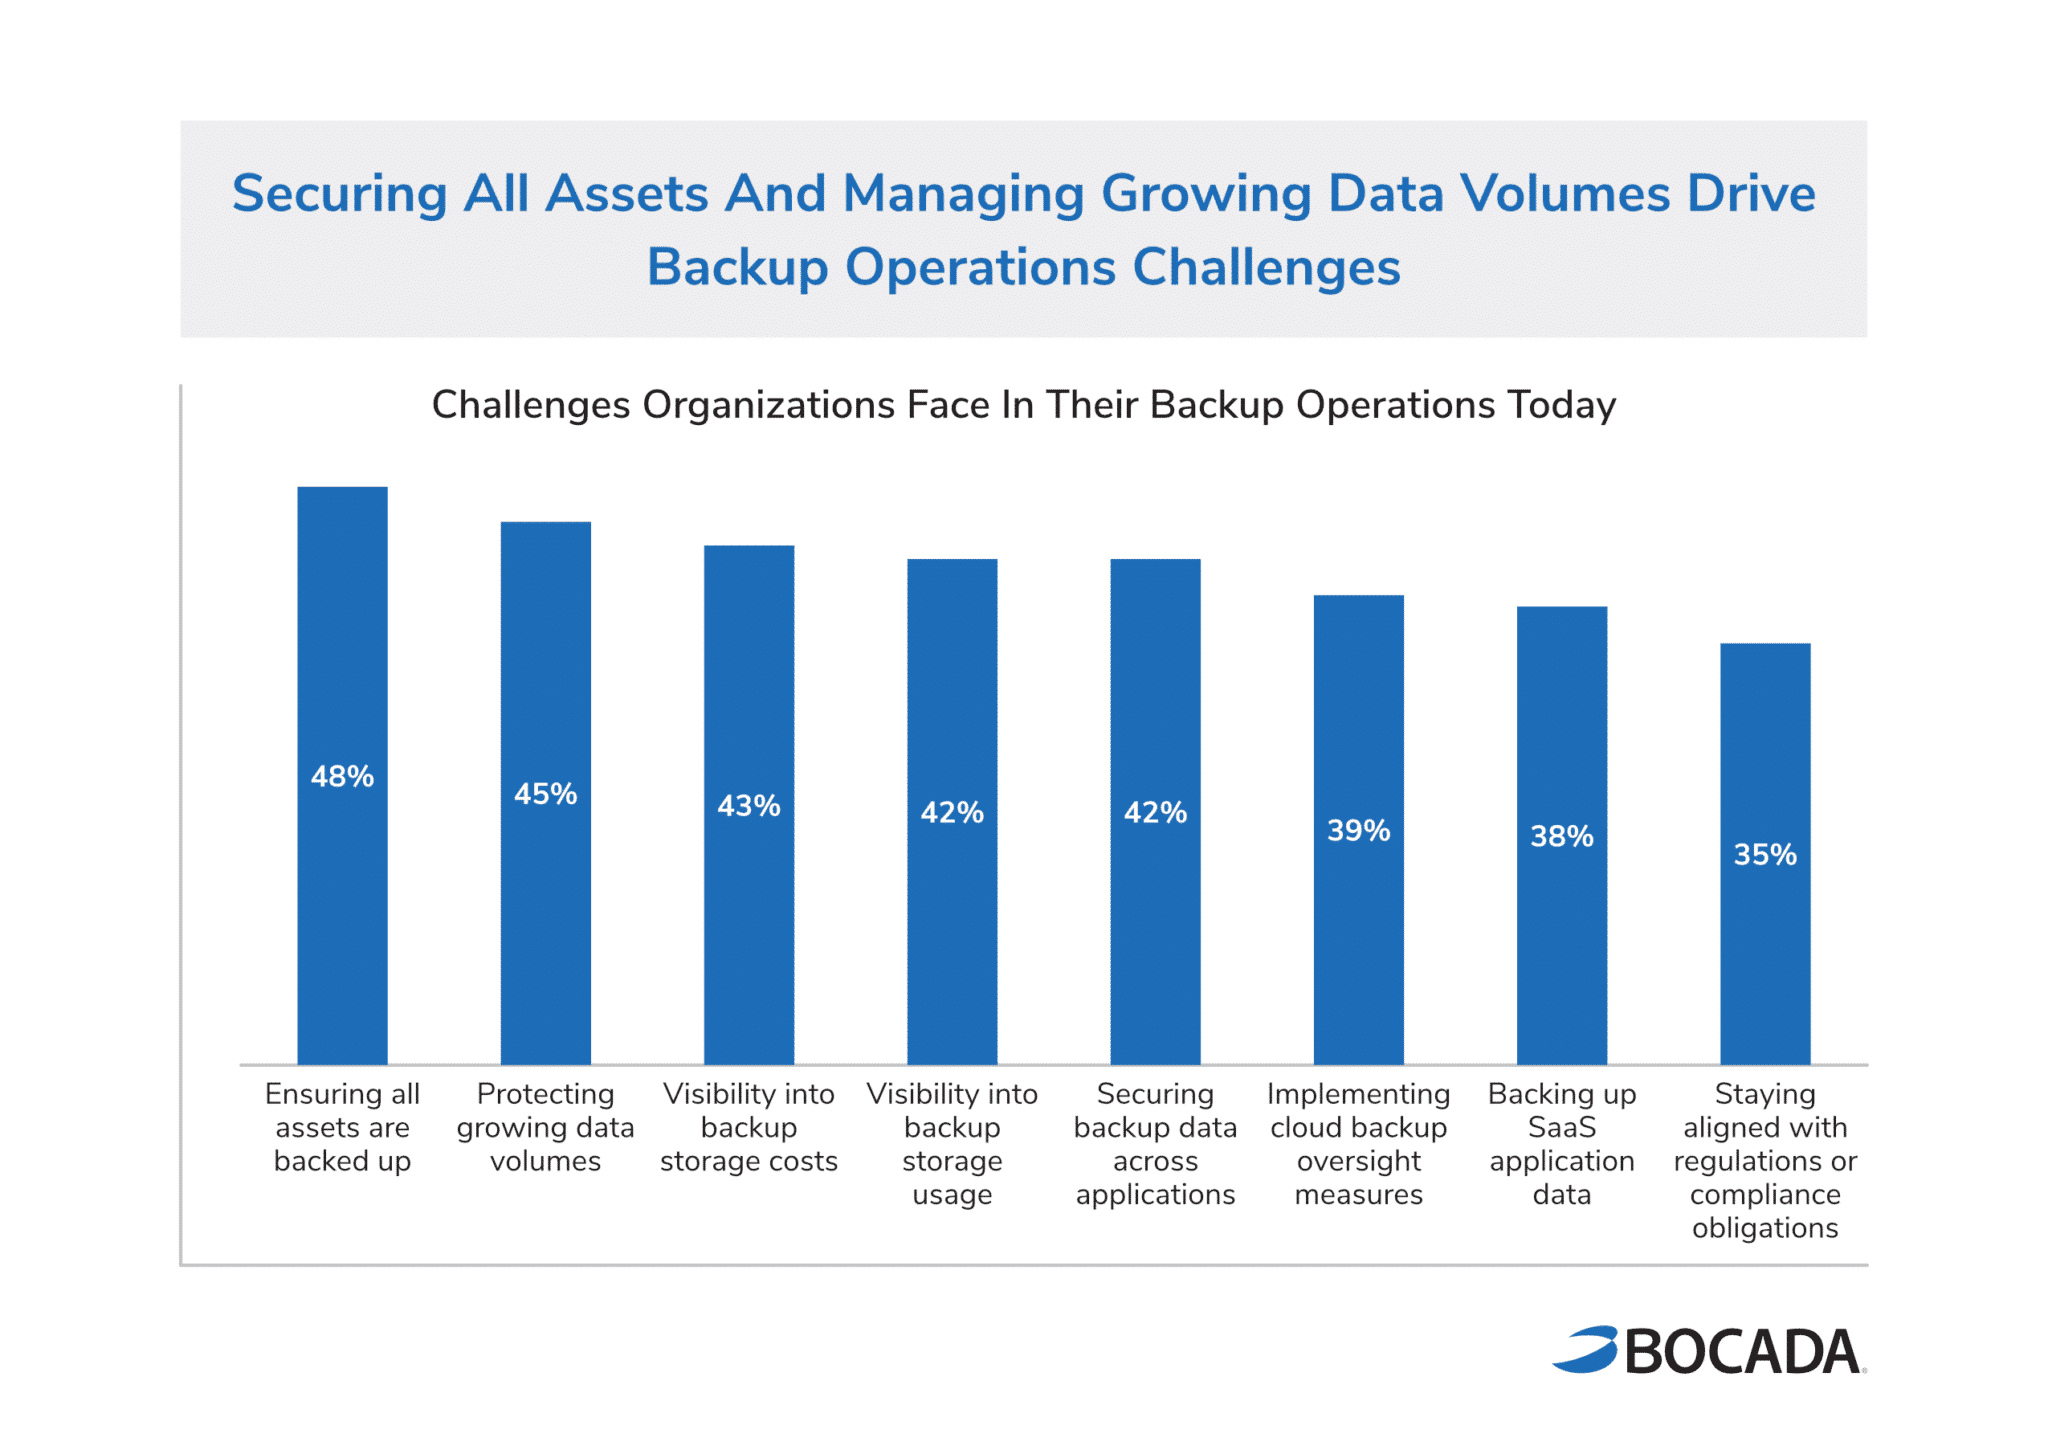 Backup Monitoring Trends Report - Typical Backkup Operations Challenges